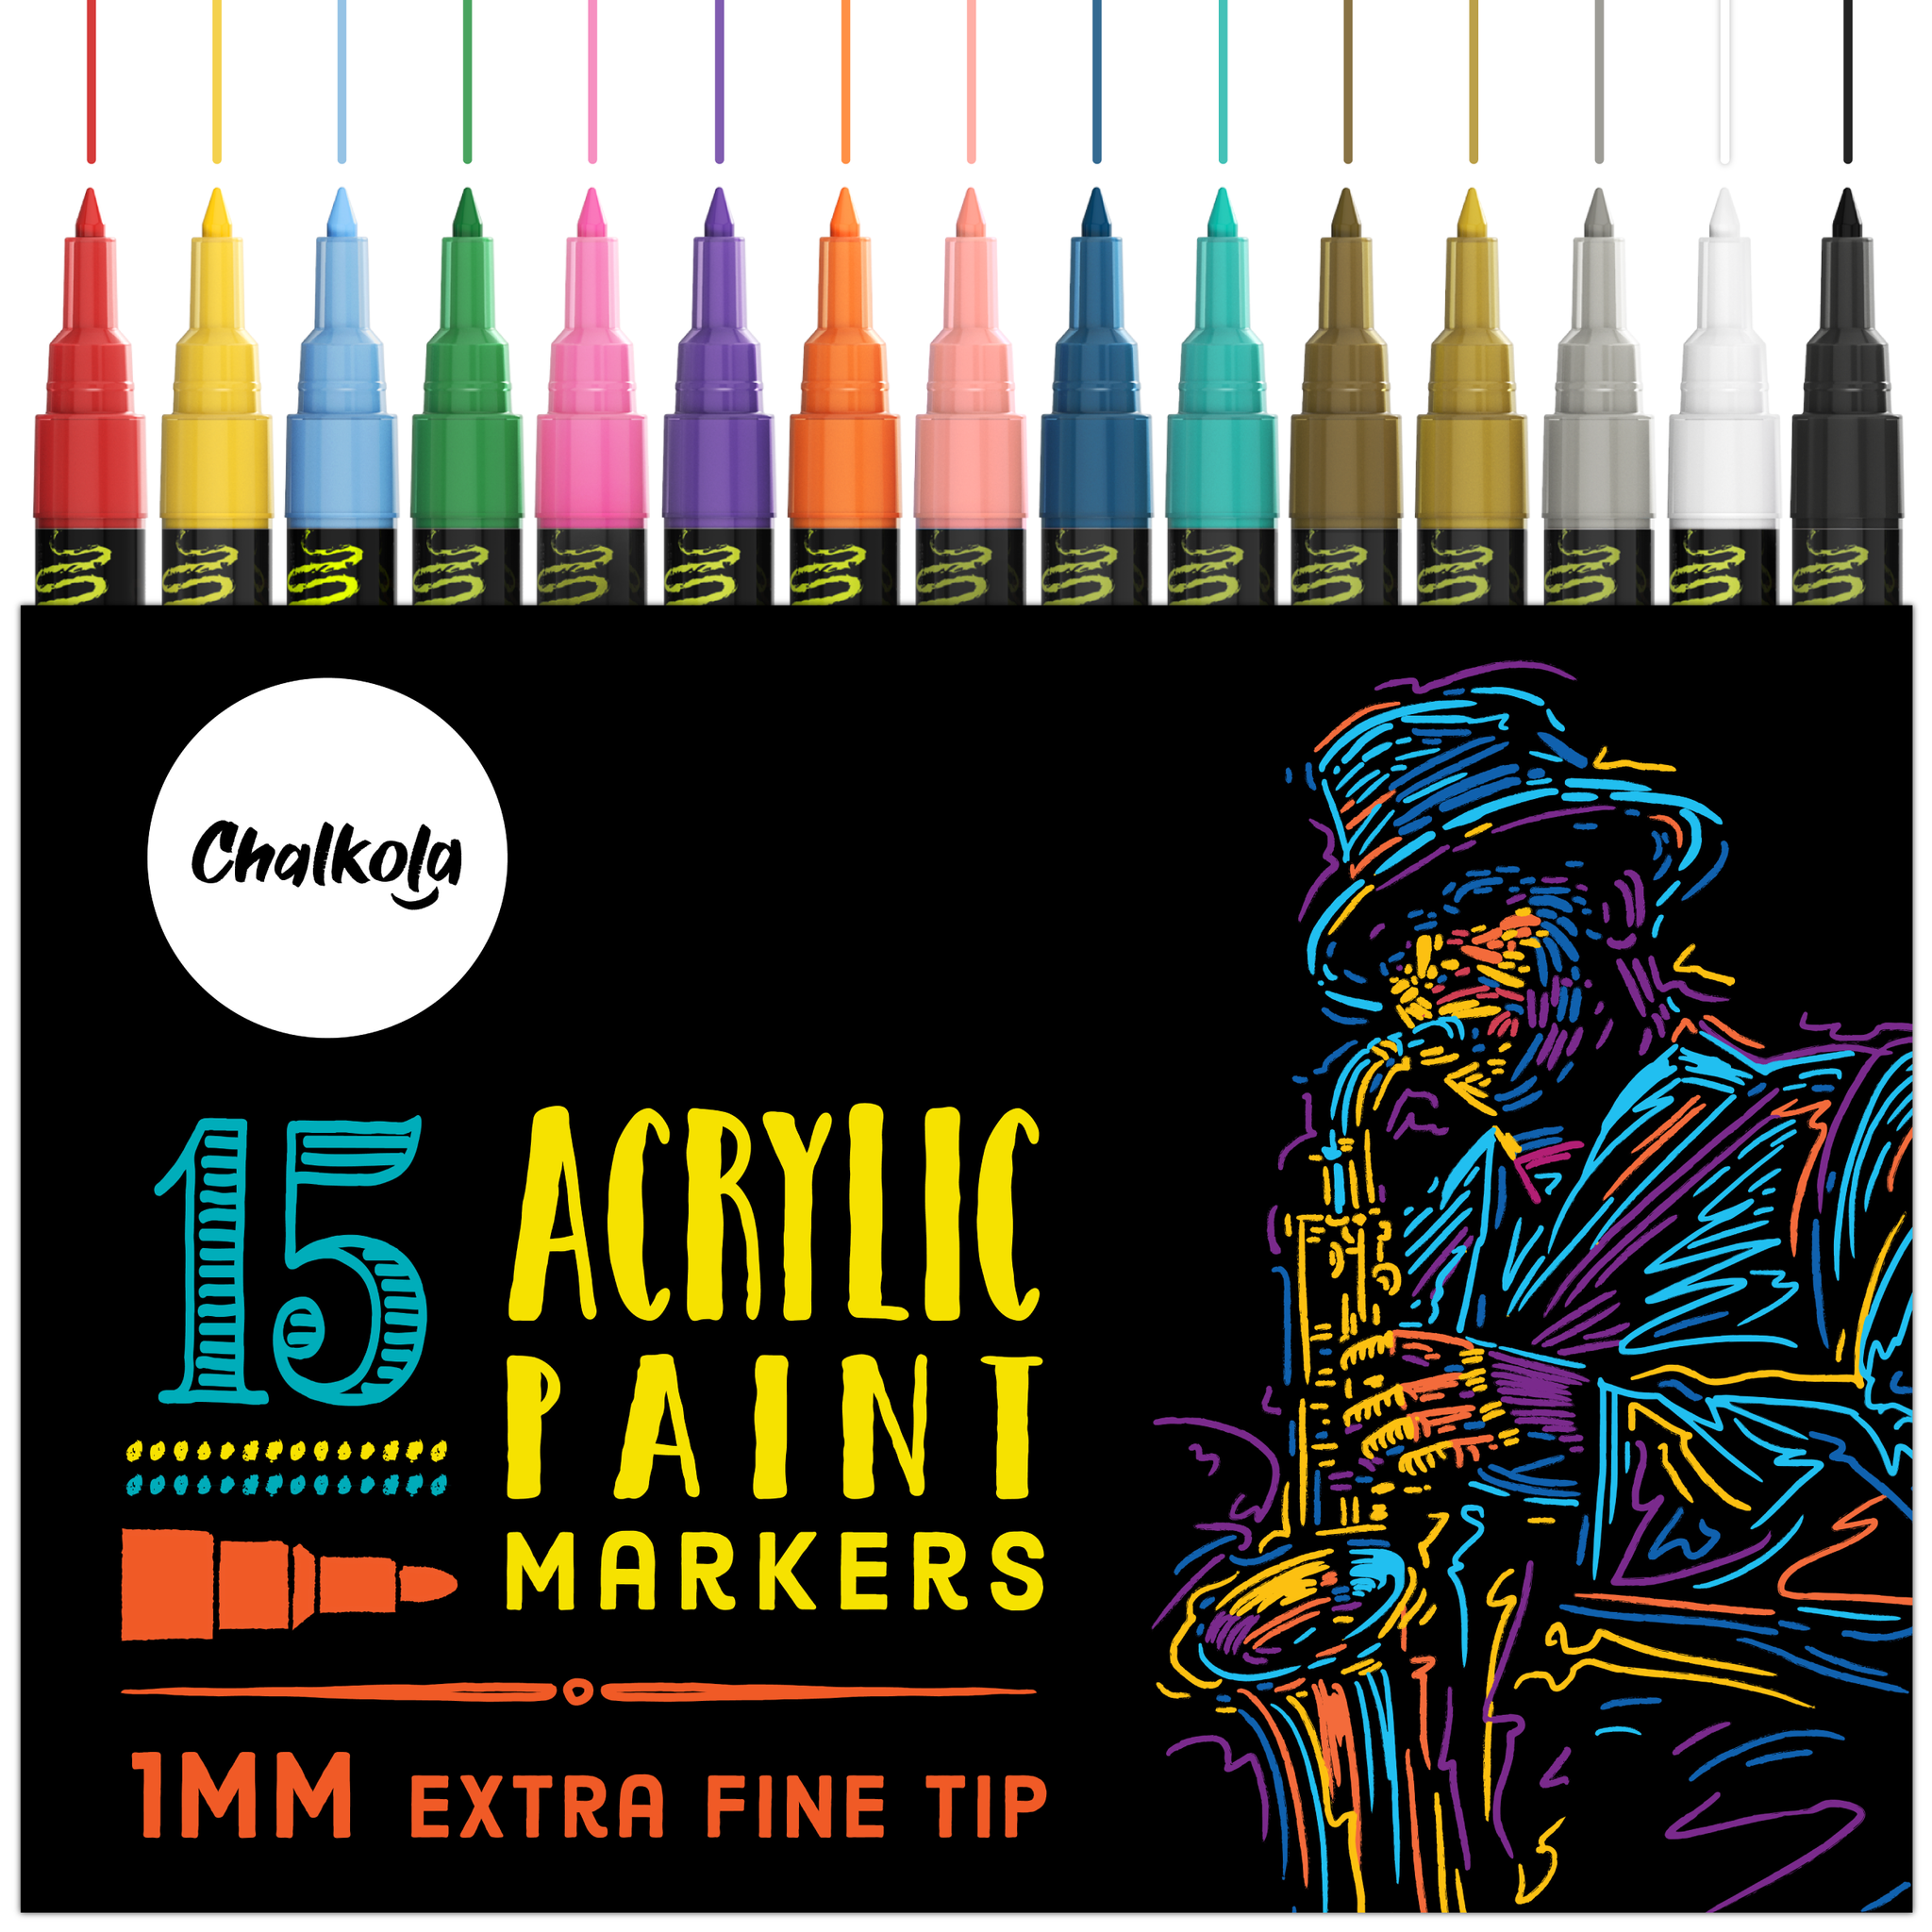  Kabcifea 10 Pack Refillable Acrylic Paint Markers 15 mm Empty  Acrylic Markers Clear White Paint Marker Pens Empty Fillable Paint Touch Up  Pen Markers for Rock Painting Wood Graffiti Paper